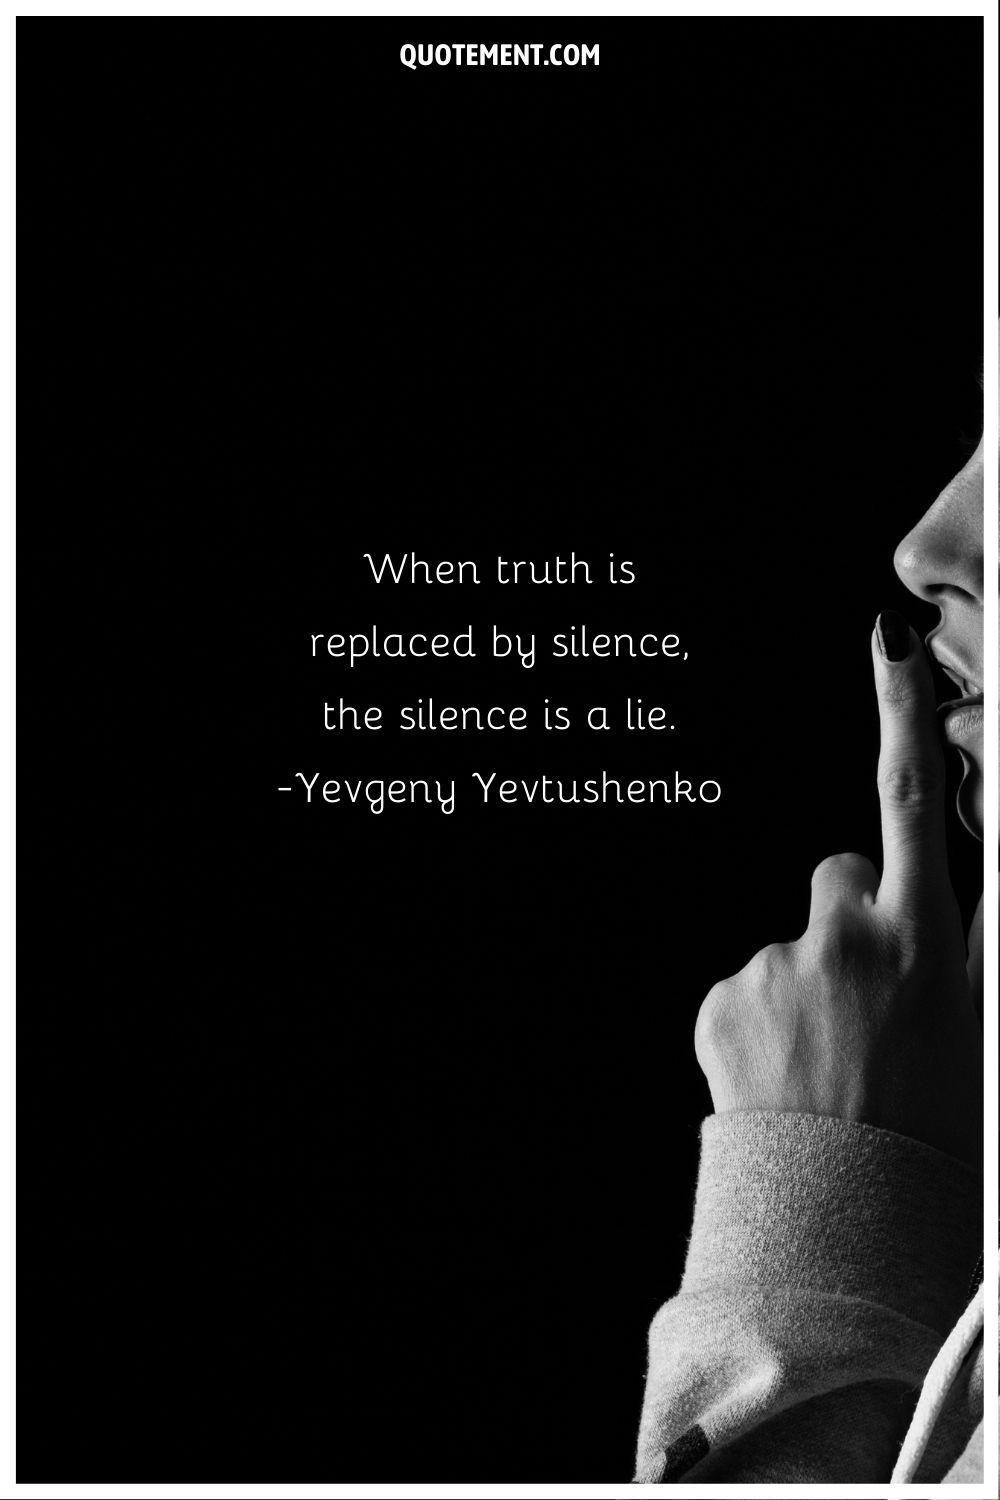 “When truth is replaced by silence, the silence is a lie.” ― Yevgeny Yevtushenko